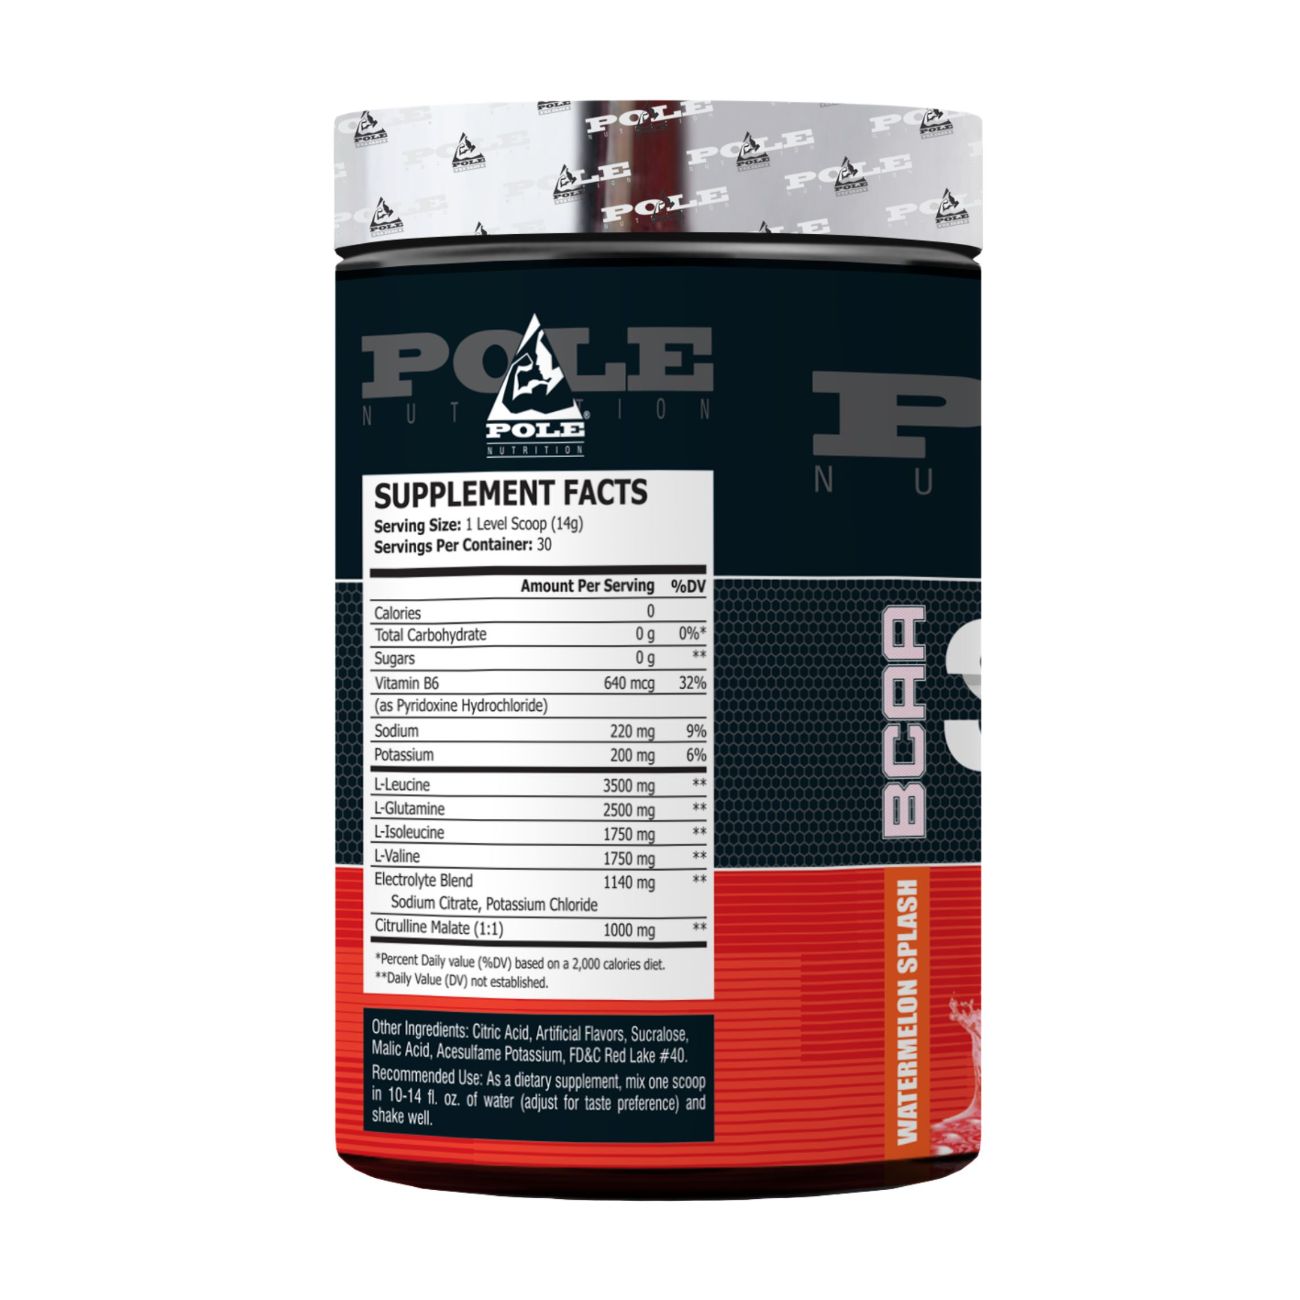 Pole Nutrition BCAA Stroke, 30 servings Supplement Facts